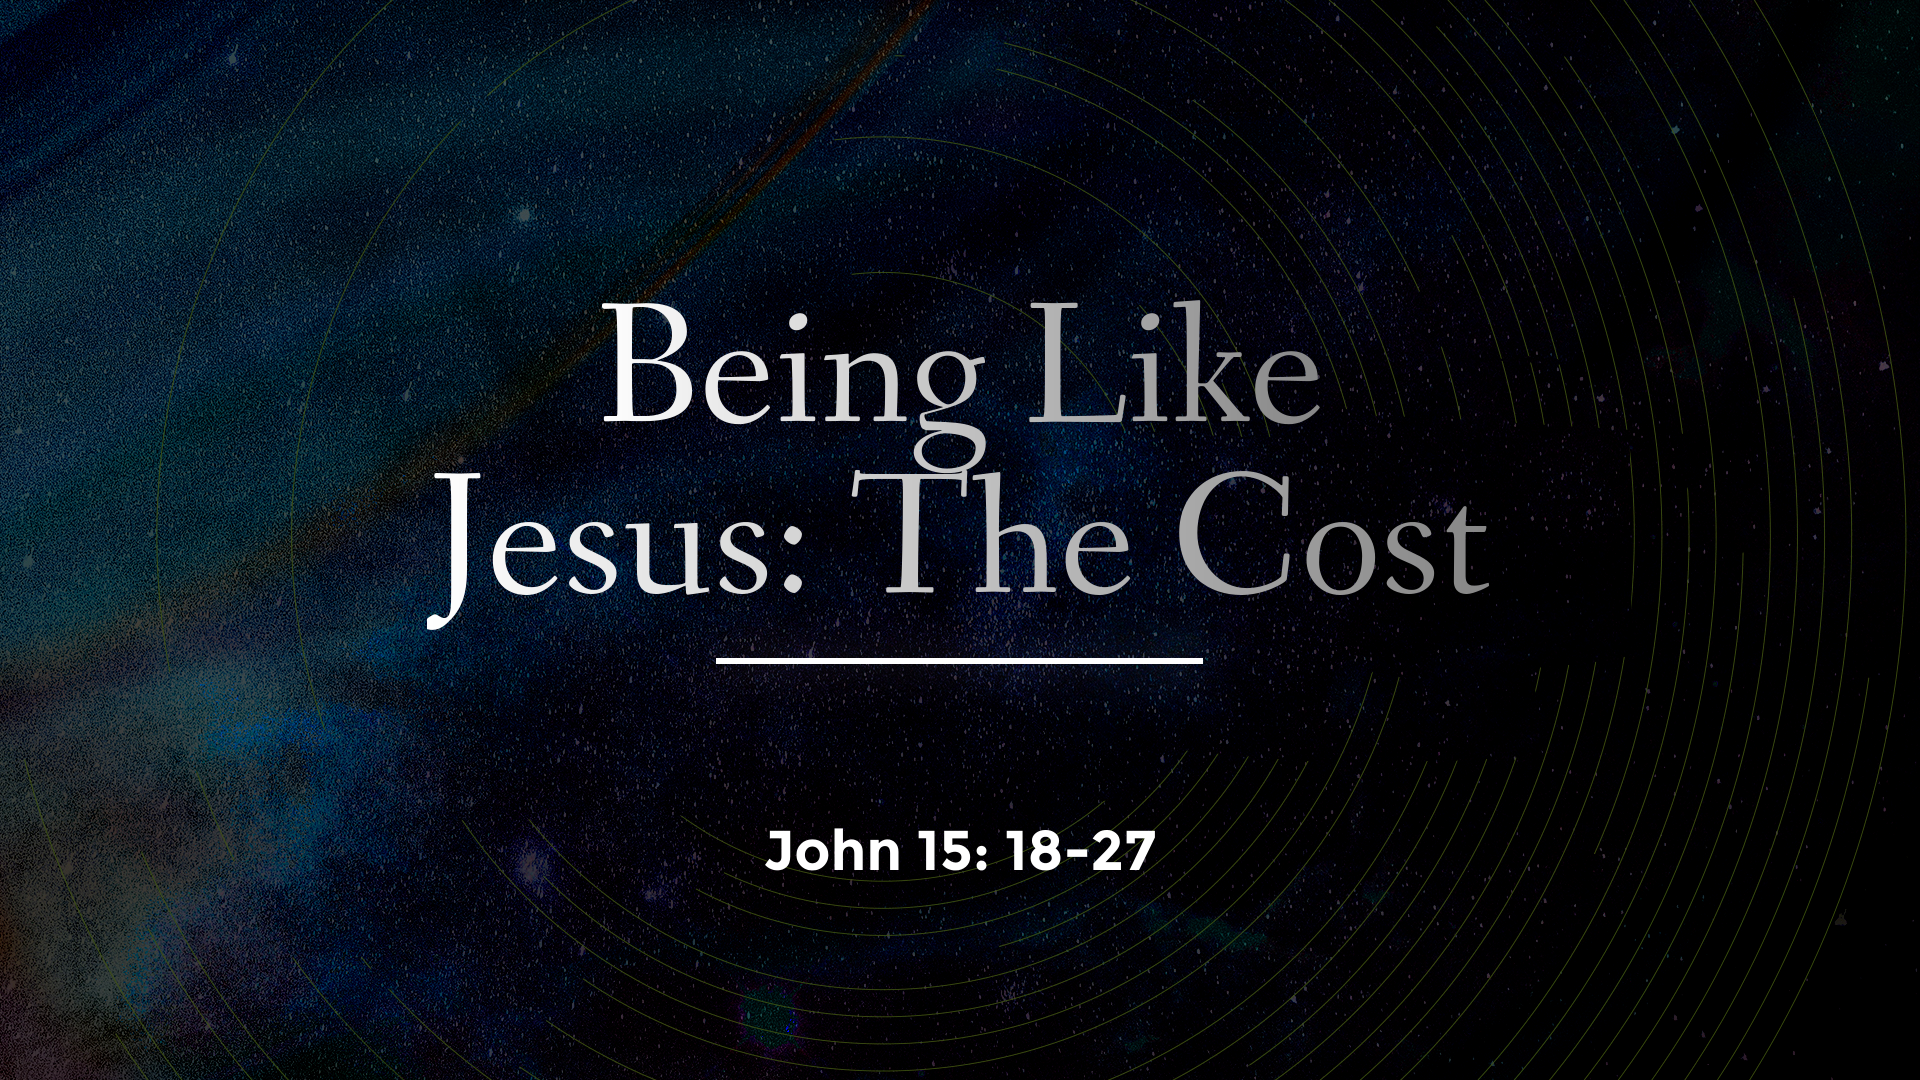 Jan 10, 2021 - Being Like Jesus: The Cost (Video)